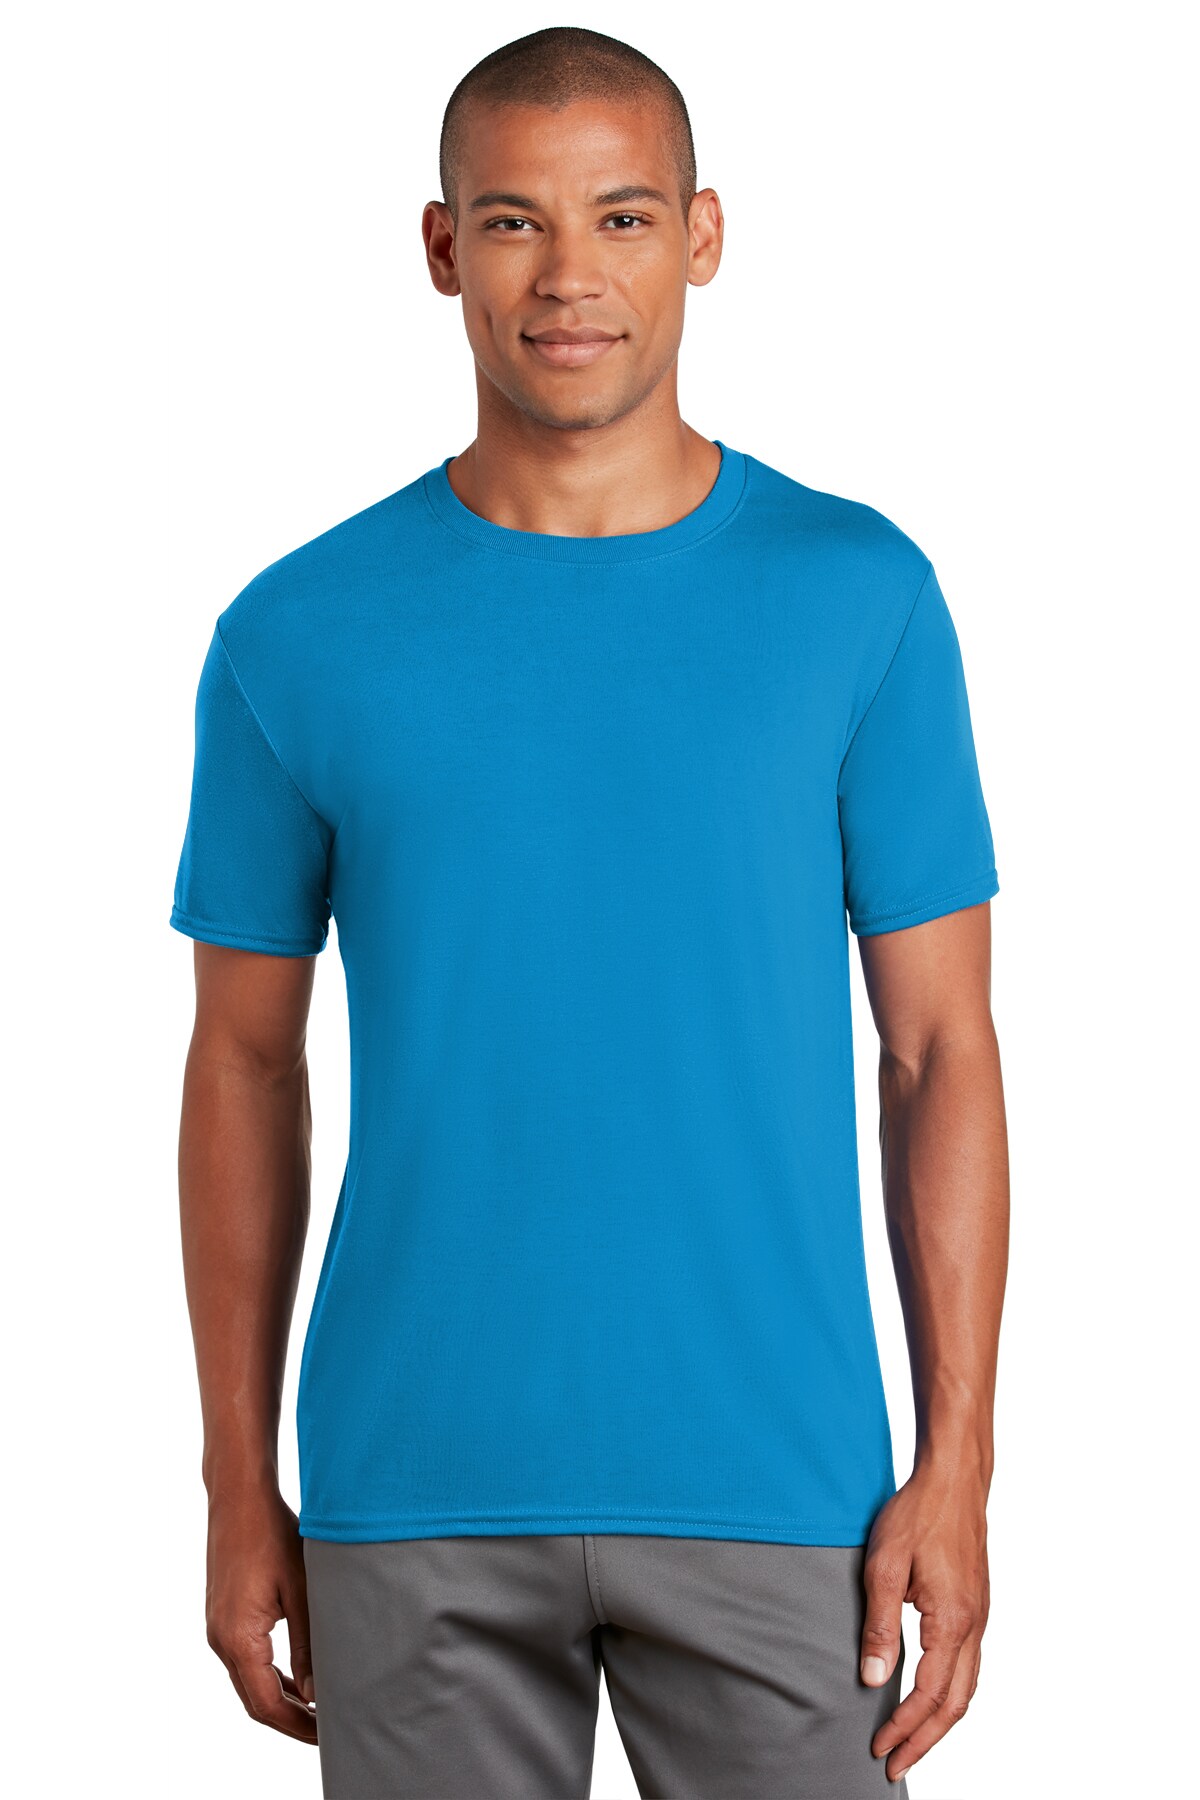 Best High-Quality T-Shirts | 5-Oz, 100% Polyester Jersey Knit |  Eco-Friendly, Affordable Promotional T-Shirts | Known for Its  Moisture-Wicking